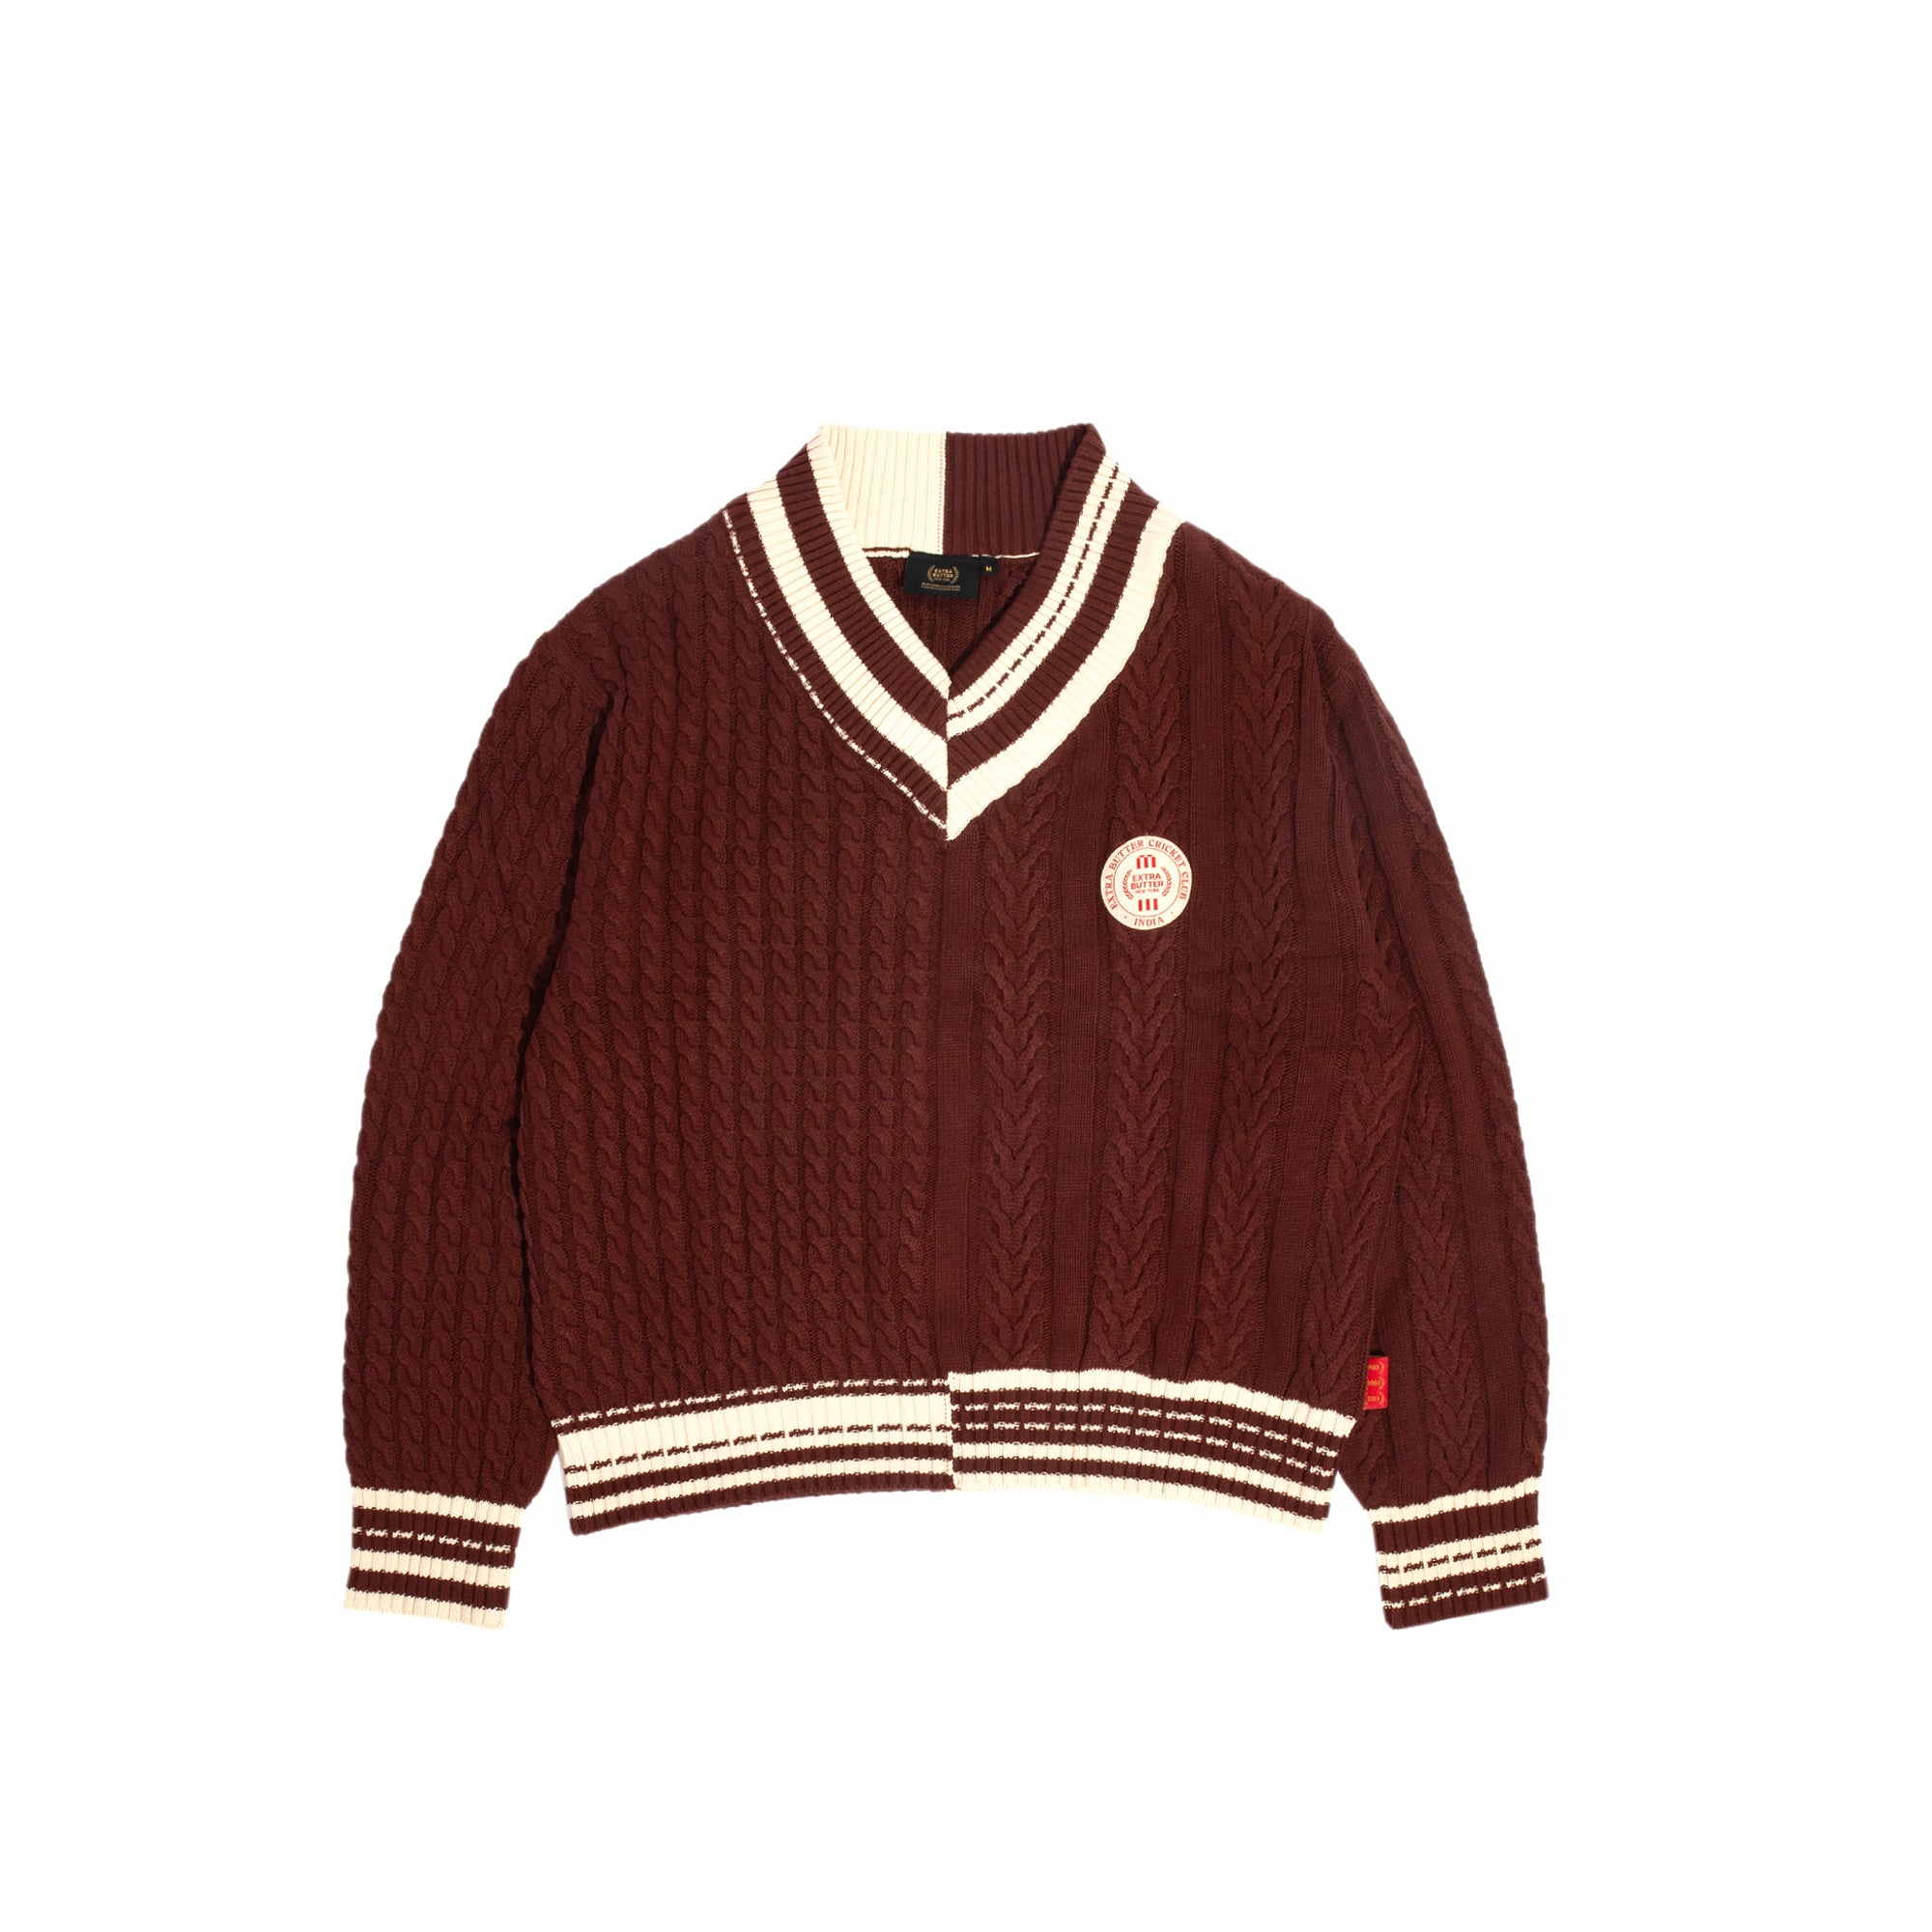 Extra Butter Cricket Club Cableknit Sweater card image